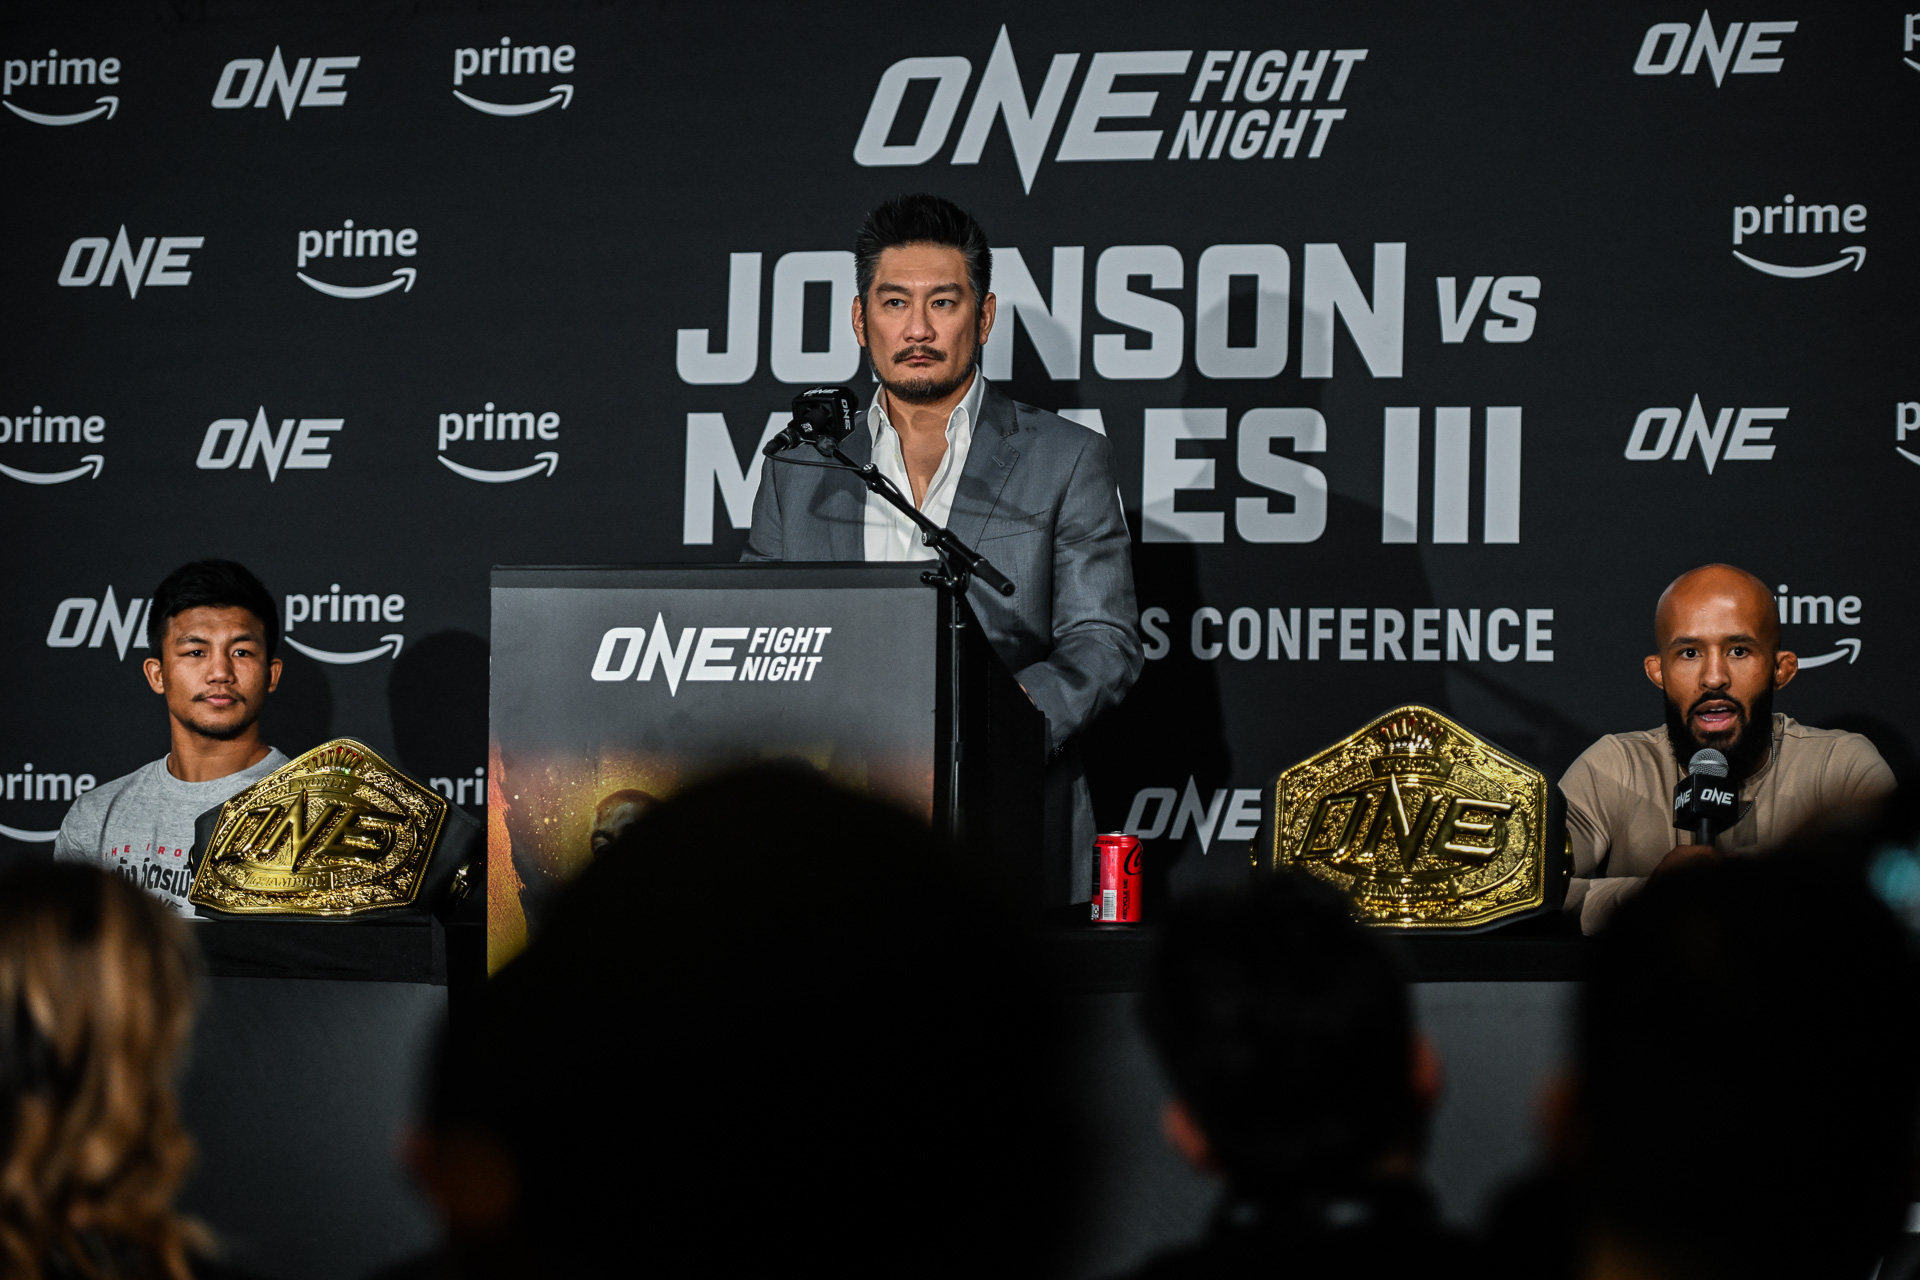 CEO Chatri Sityodtong with Demetrious Johnson (right) and Rodtang (left) at the ONE Fight Night 10 press conference in Denver. Photos: ONE Championship